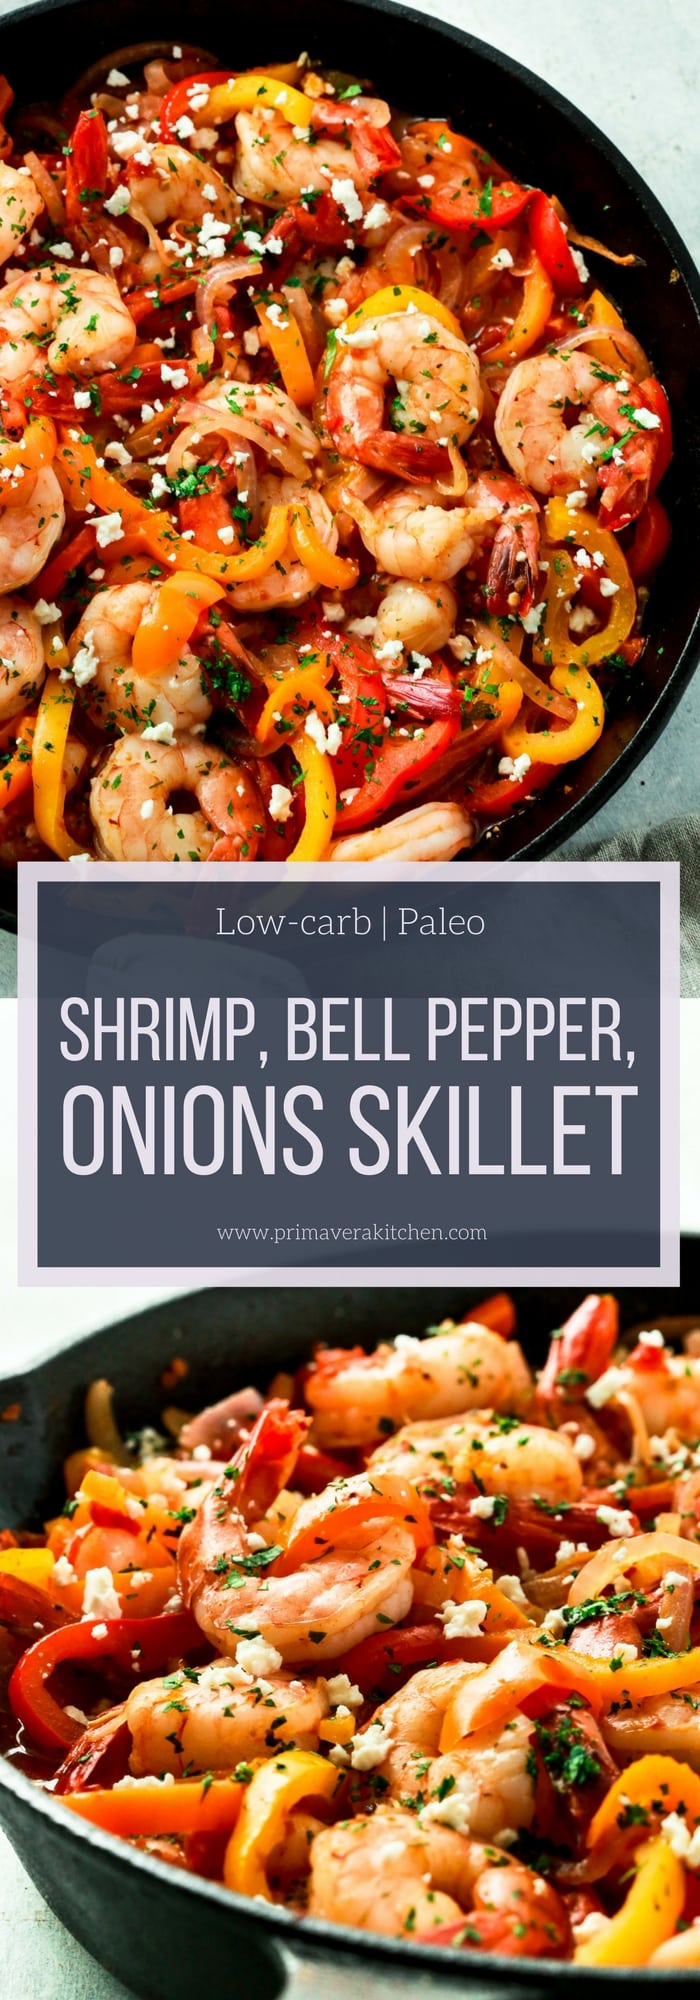 Shrimp, Bell Pepper and Onions Skillet